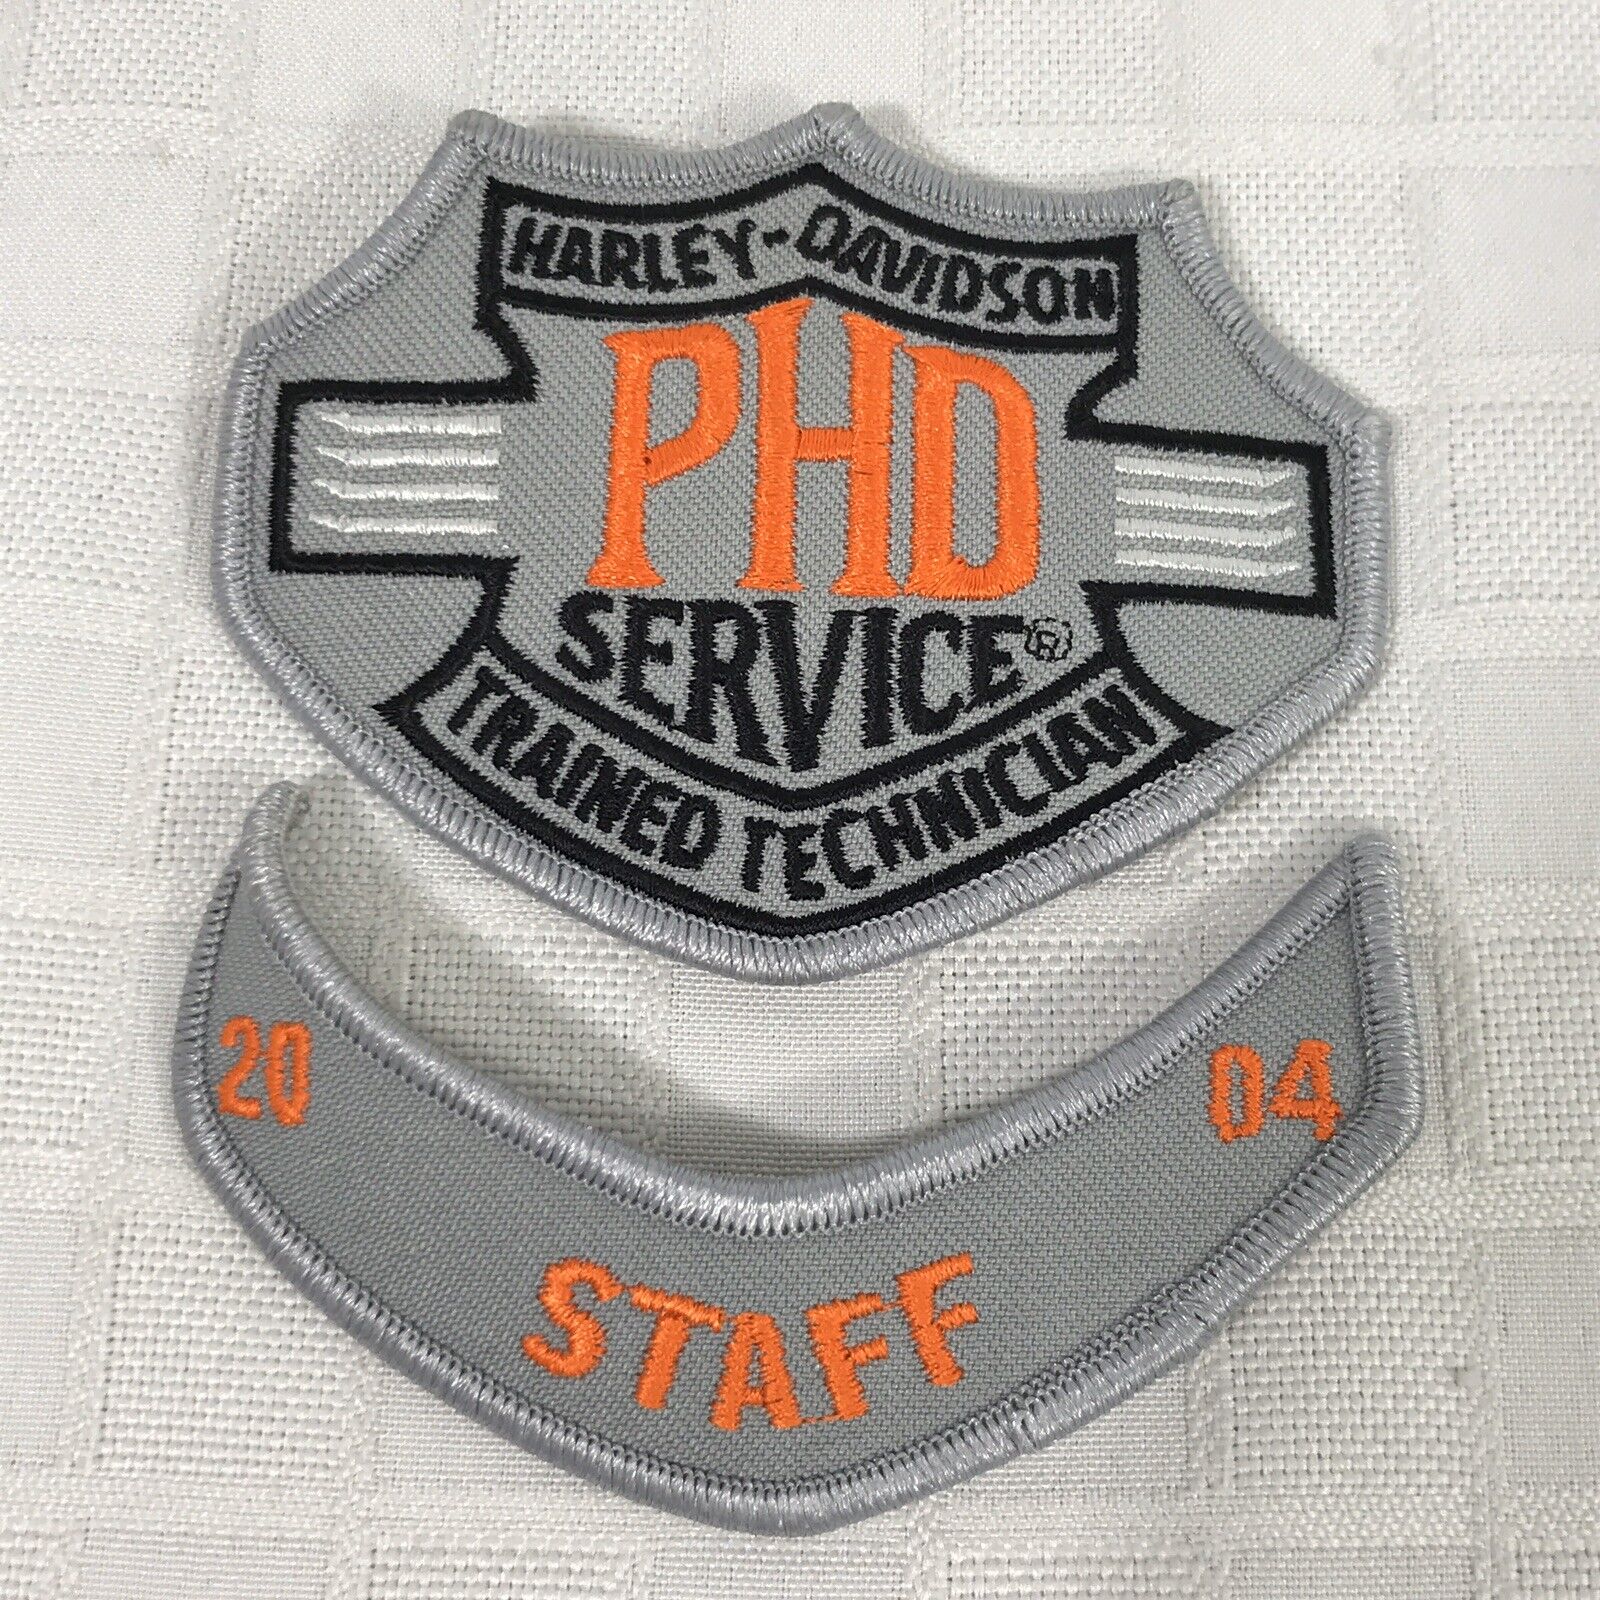 Harley Davidson Motorcycles PHD Service Trained Technician & 2004 Staff Patch